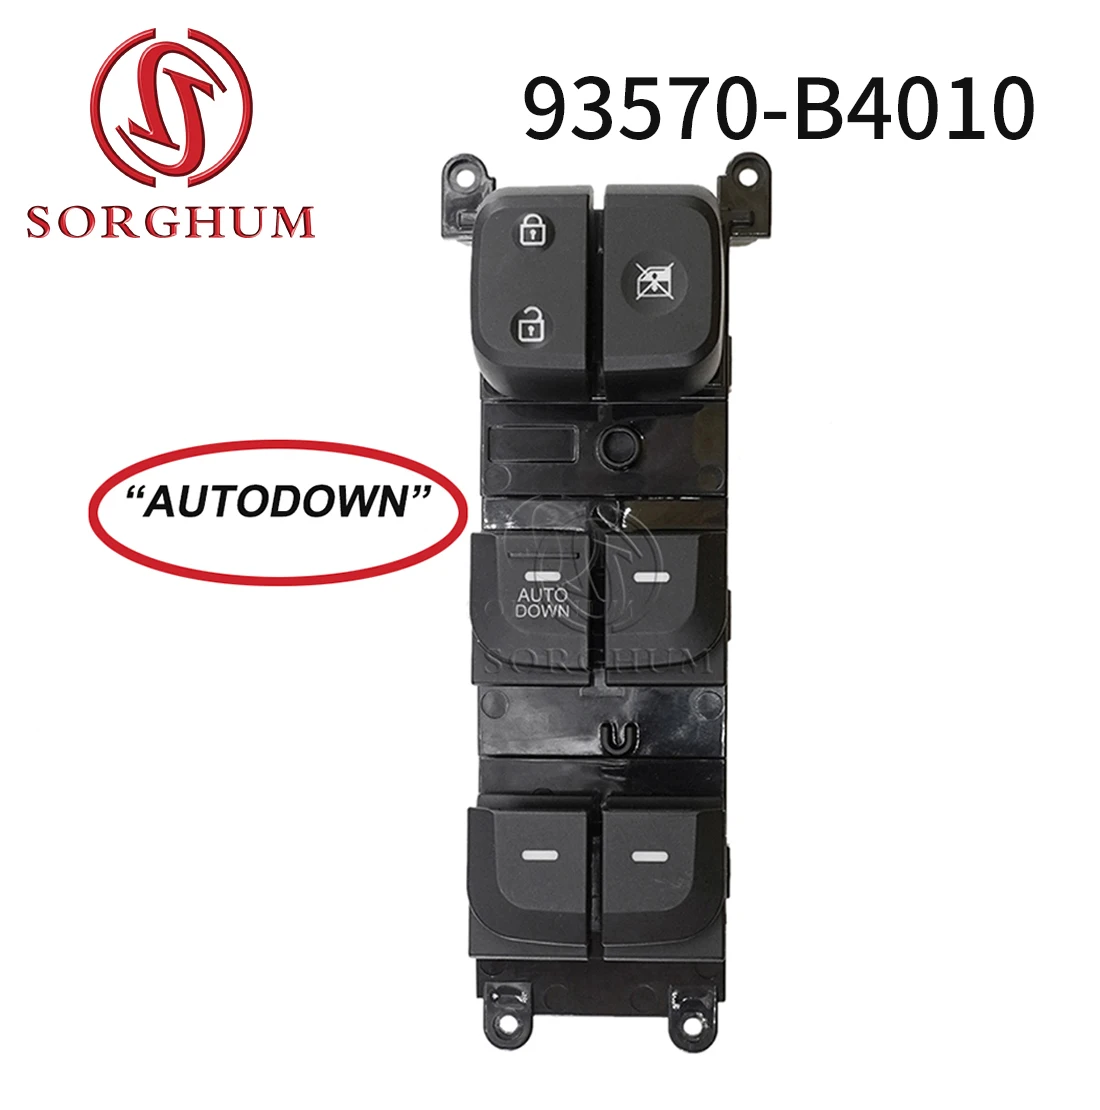 

SORGHUM 93570-B4010 For Hyundai i10 Doctor 10 Places Ear 1.0 sx 2013 2014 2015 2016 2017 Master Window Switch Button 93570B4010